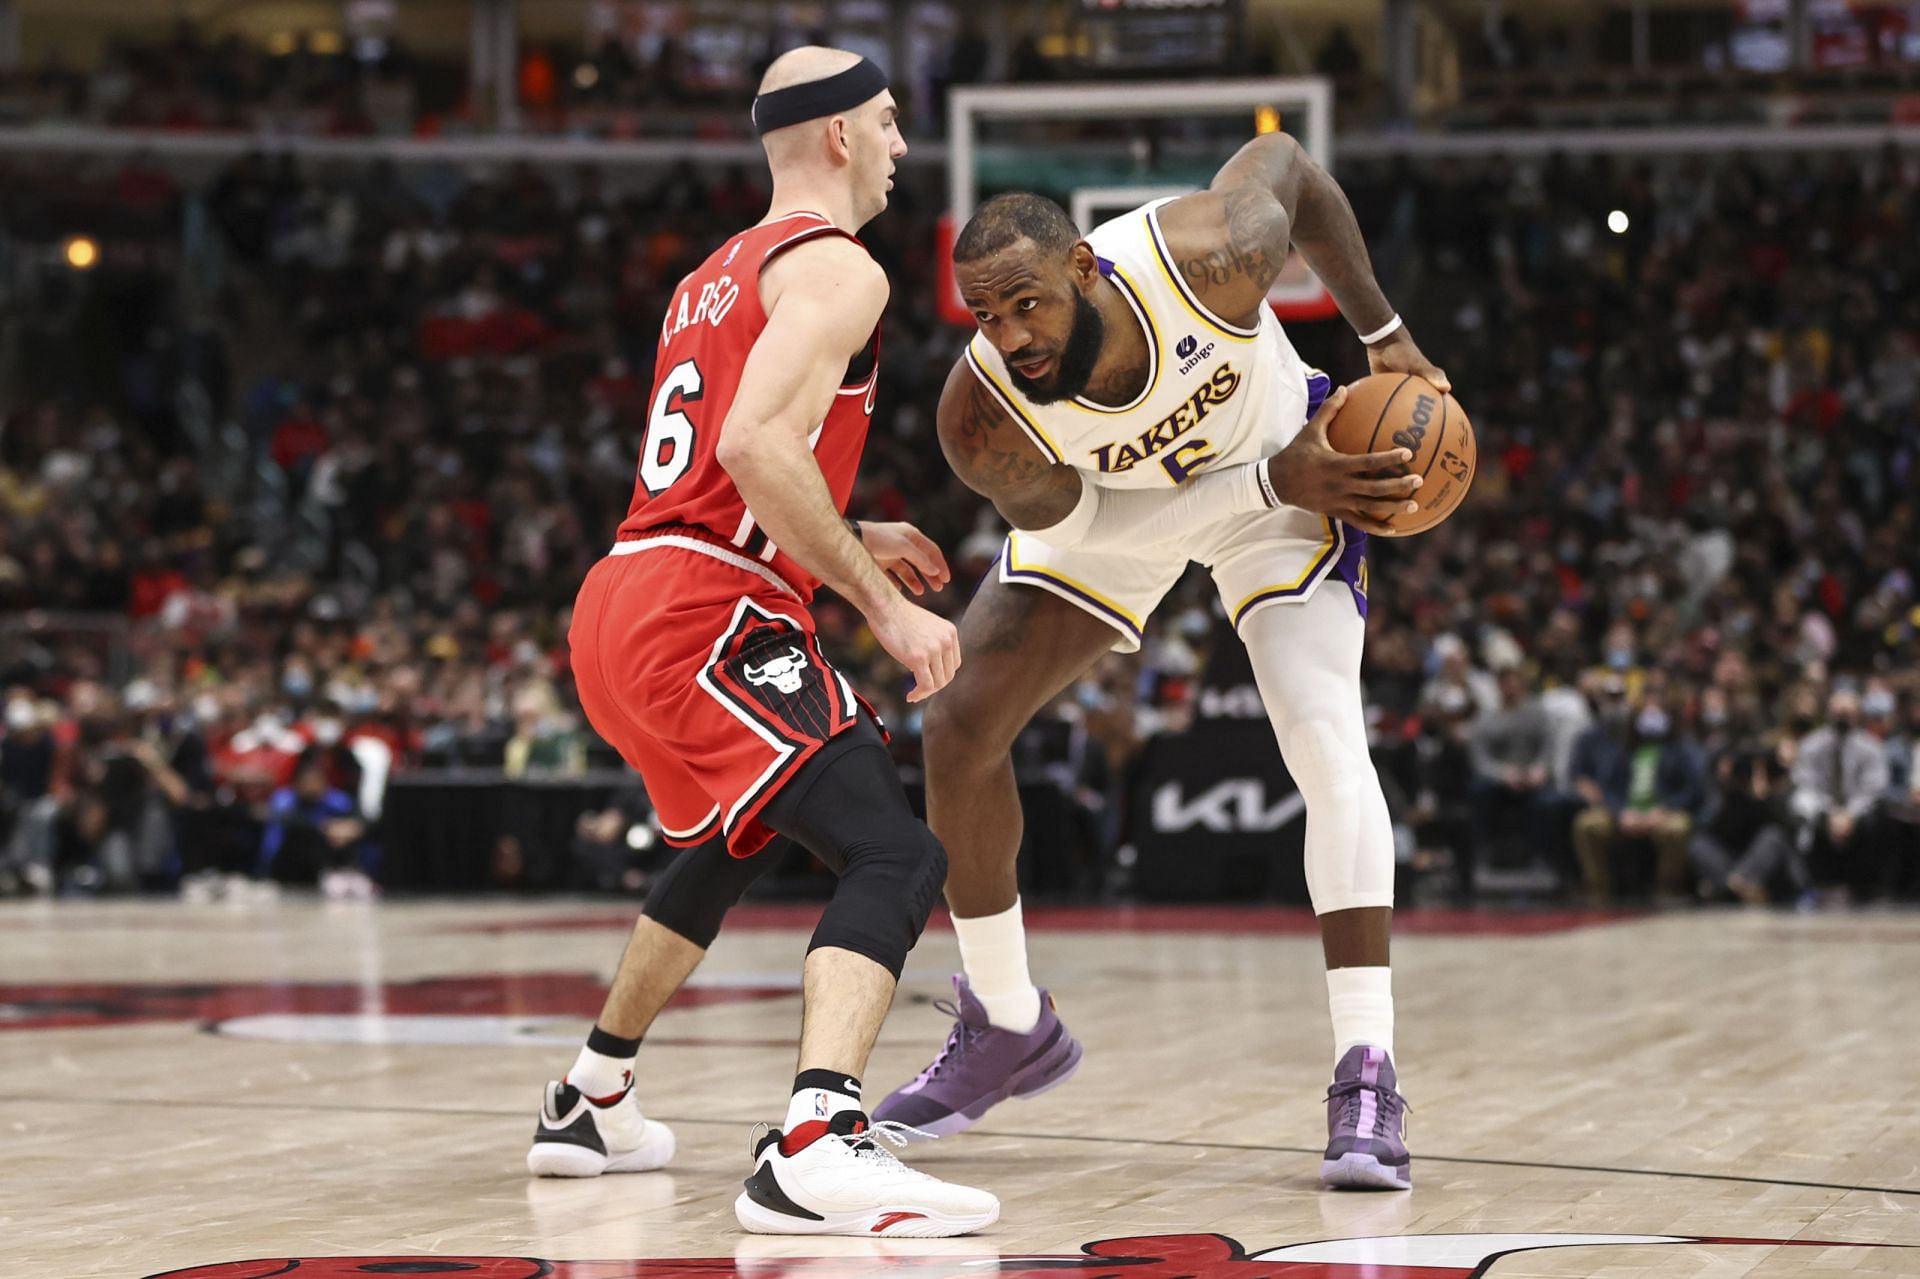 Is LeBron James playing tonight against Bulls? Latest injury update on Lakers’ star ahead of matchup (March 26, 2023) - TodaysChronic